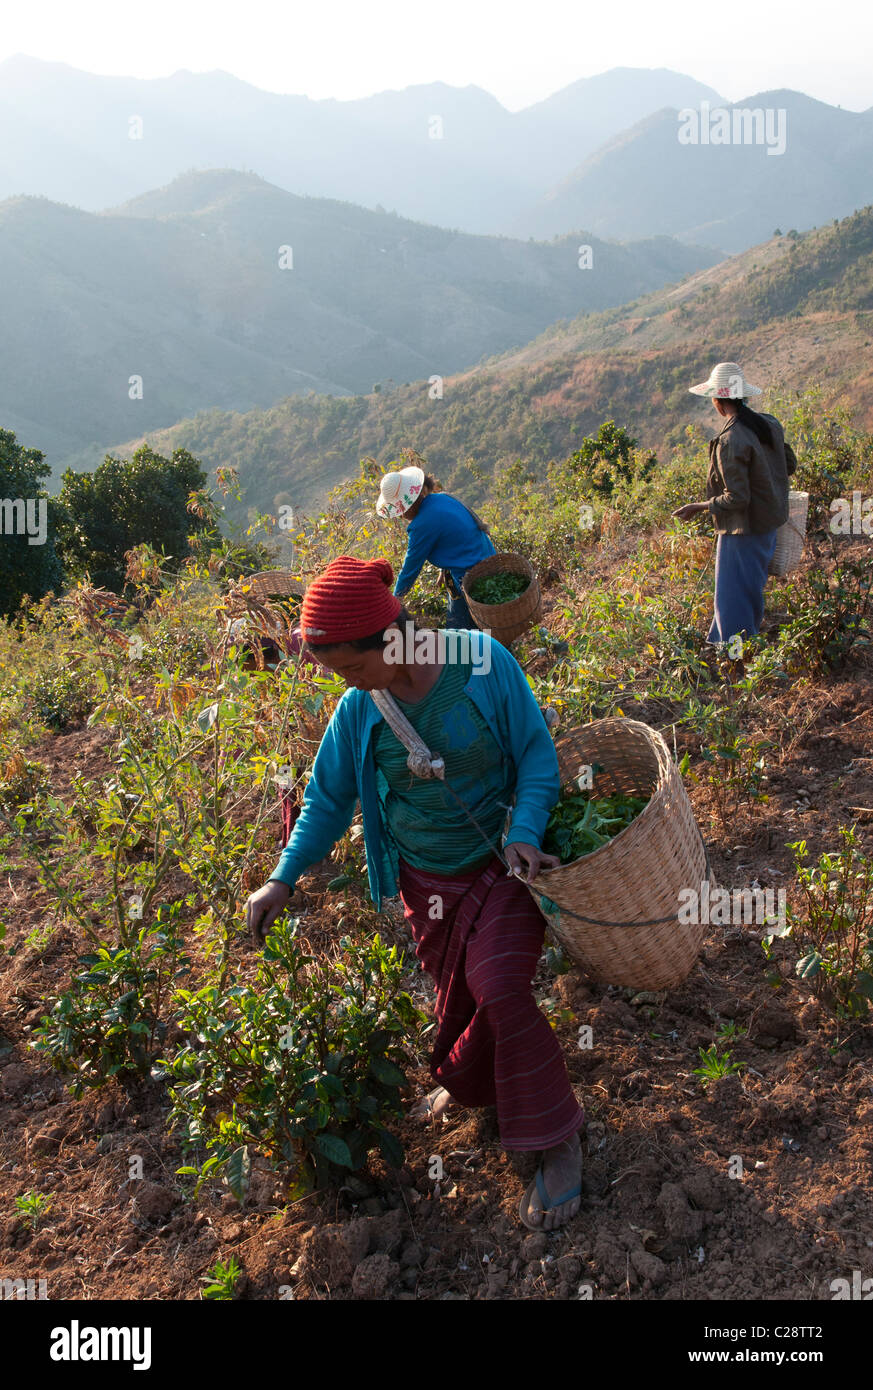 2 palaung women carrying baskets on their back. Shan Hills. Myanmar Stock Photo